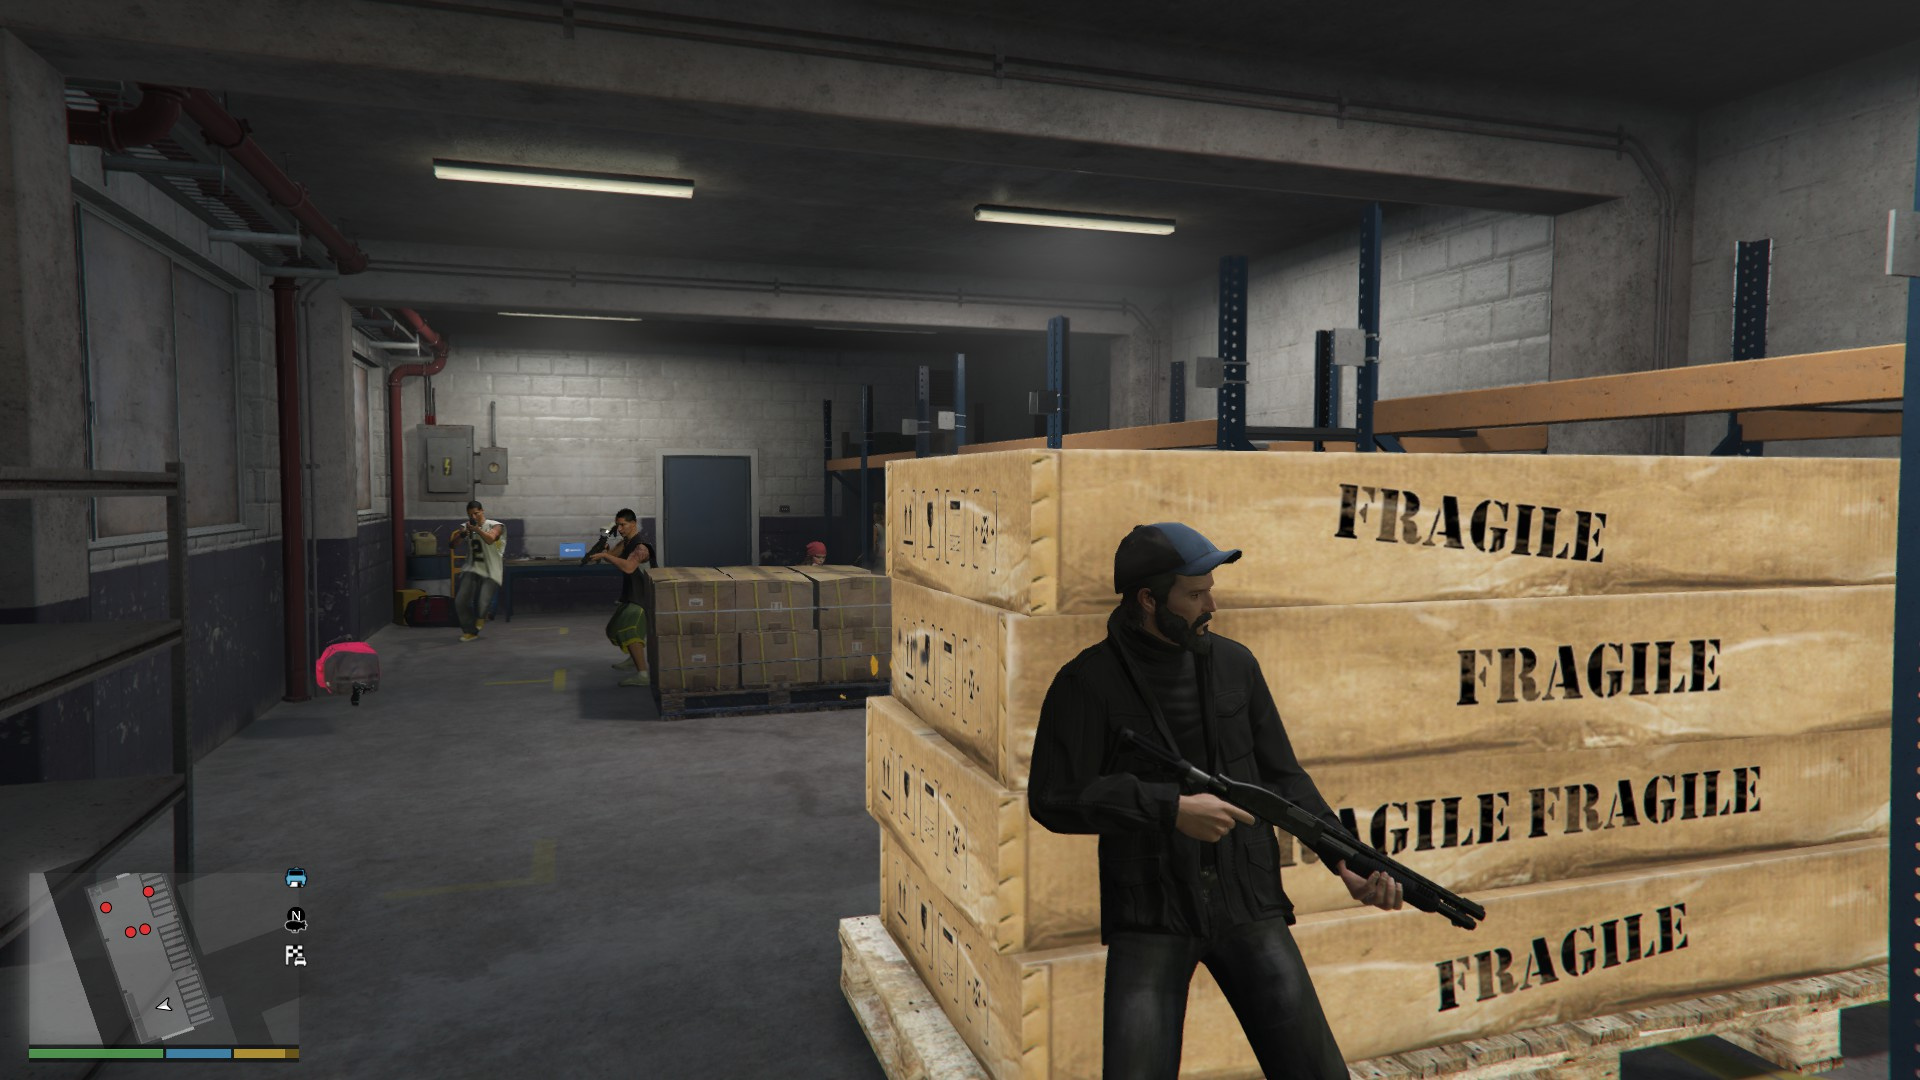 How to Install Story Mode Heist Missions (2019) GTA 5 MODS 